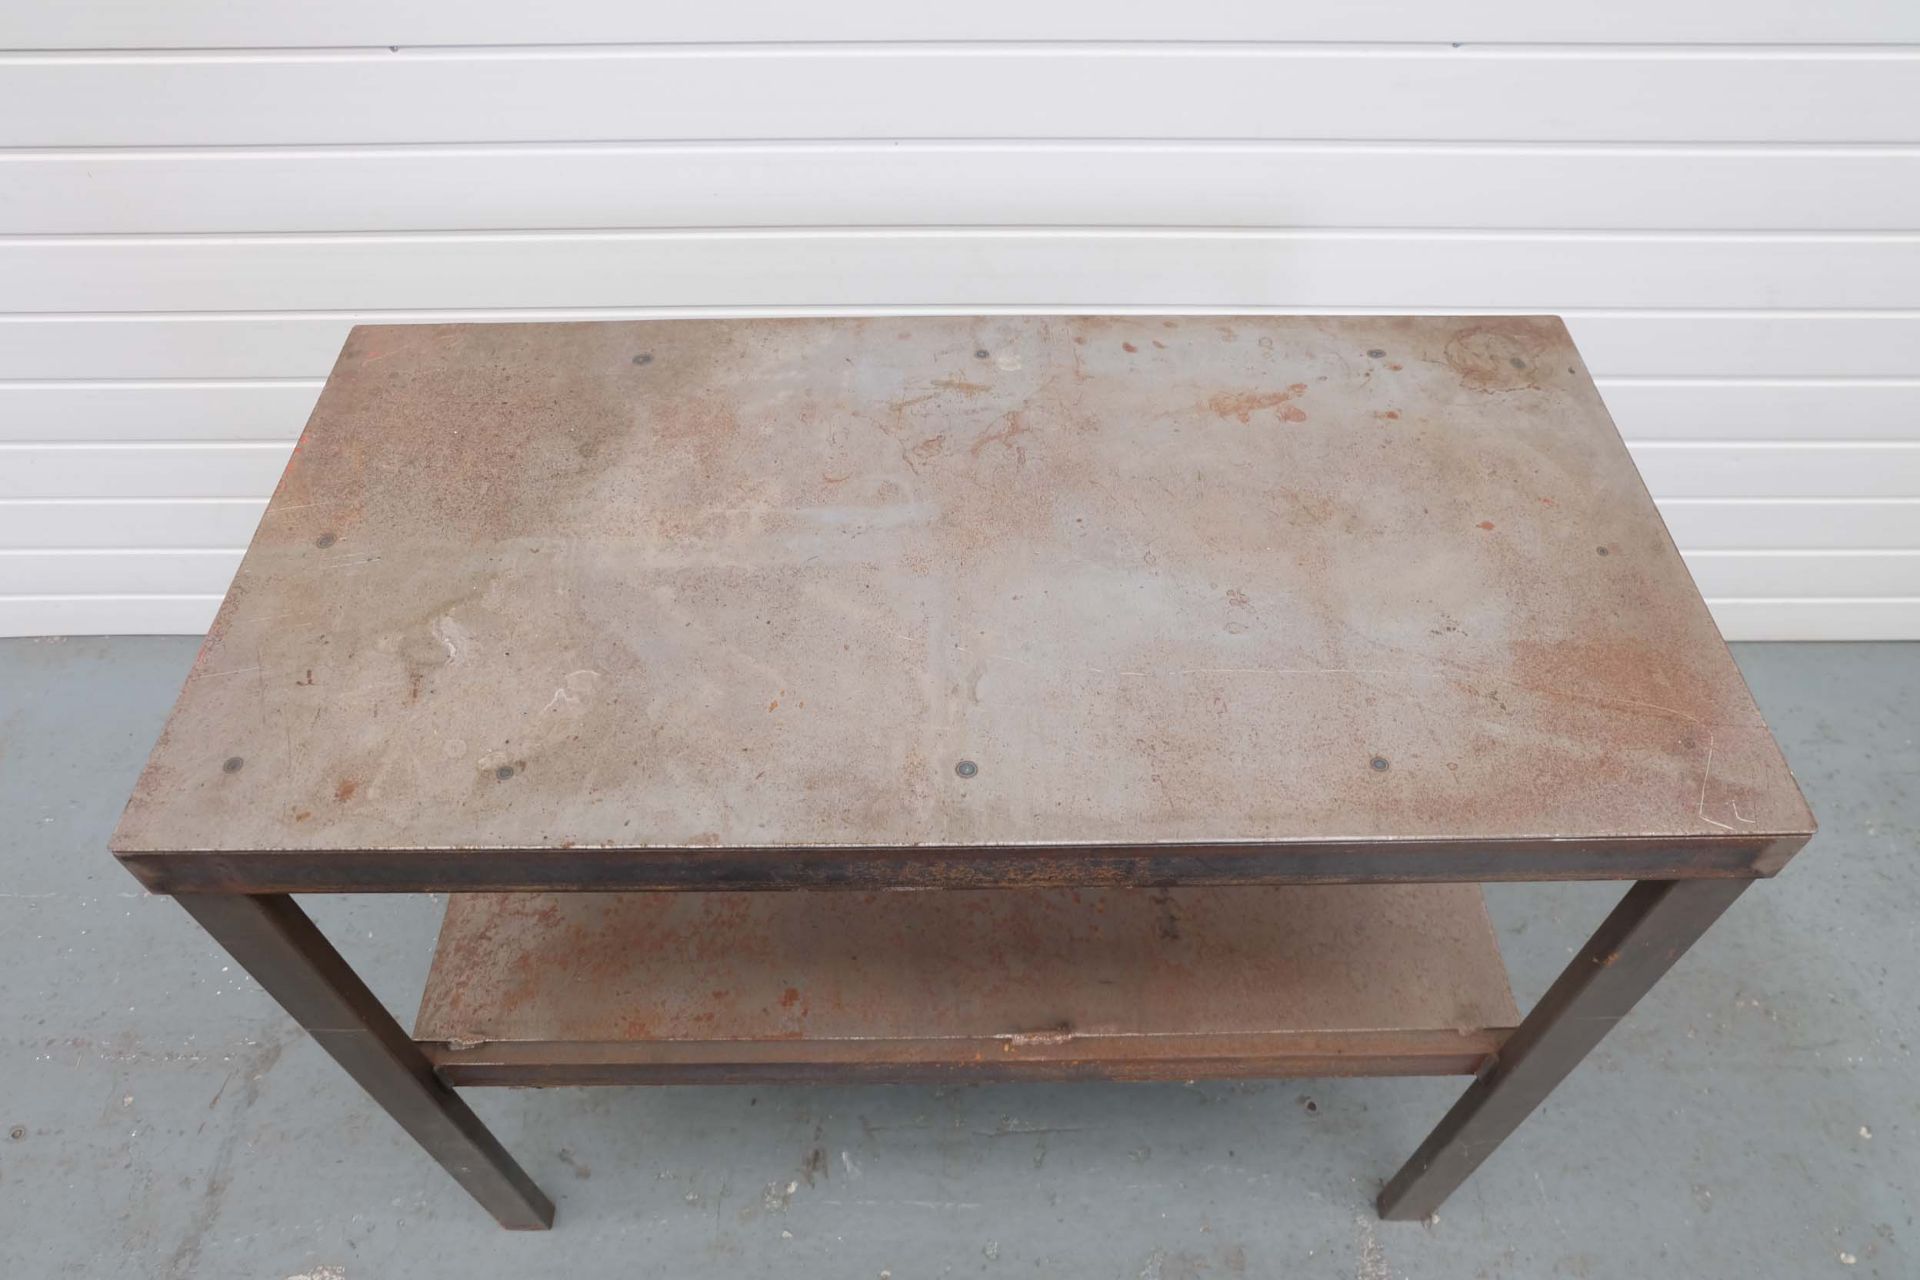 Steel Frame Table With Steel Top & Shelf. Dimensions: 1000 x 500mm. Height: 800mm. - Image 3 of 3